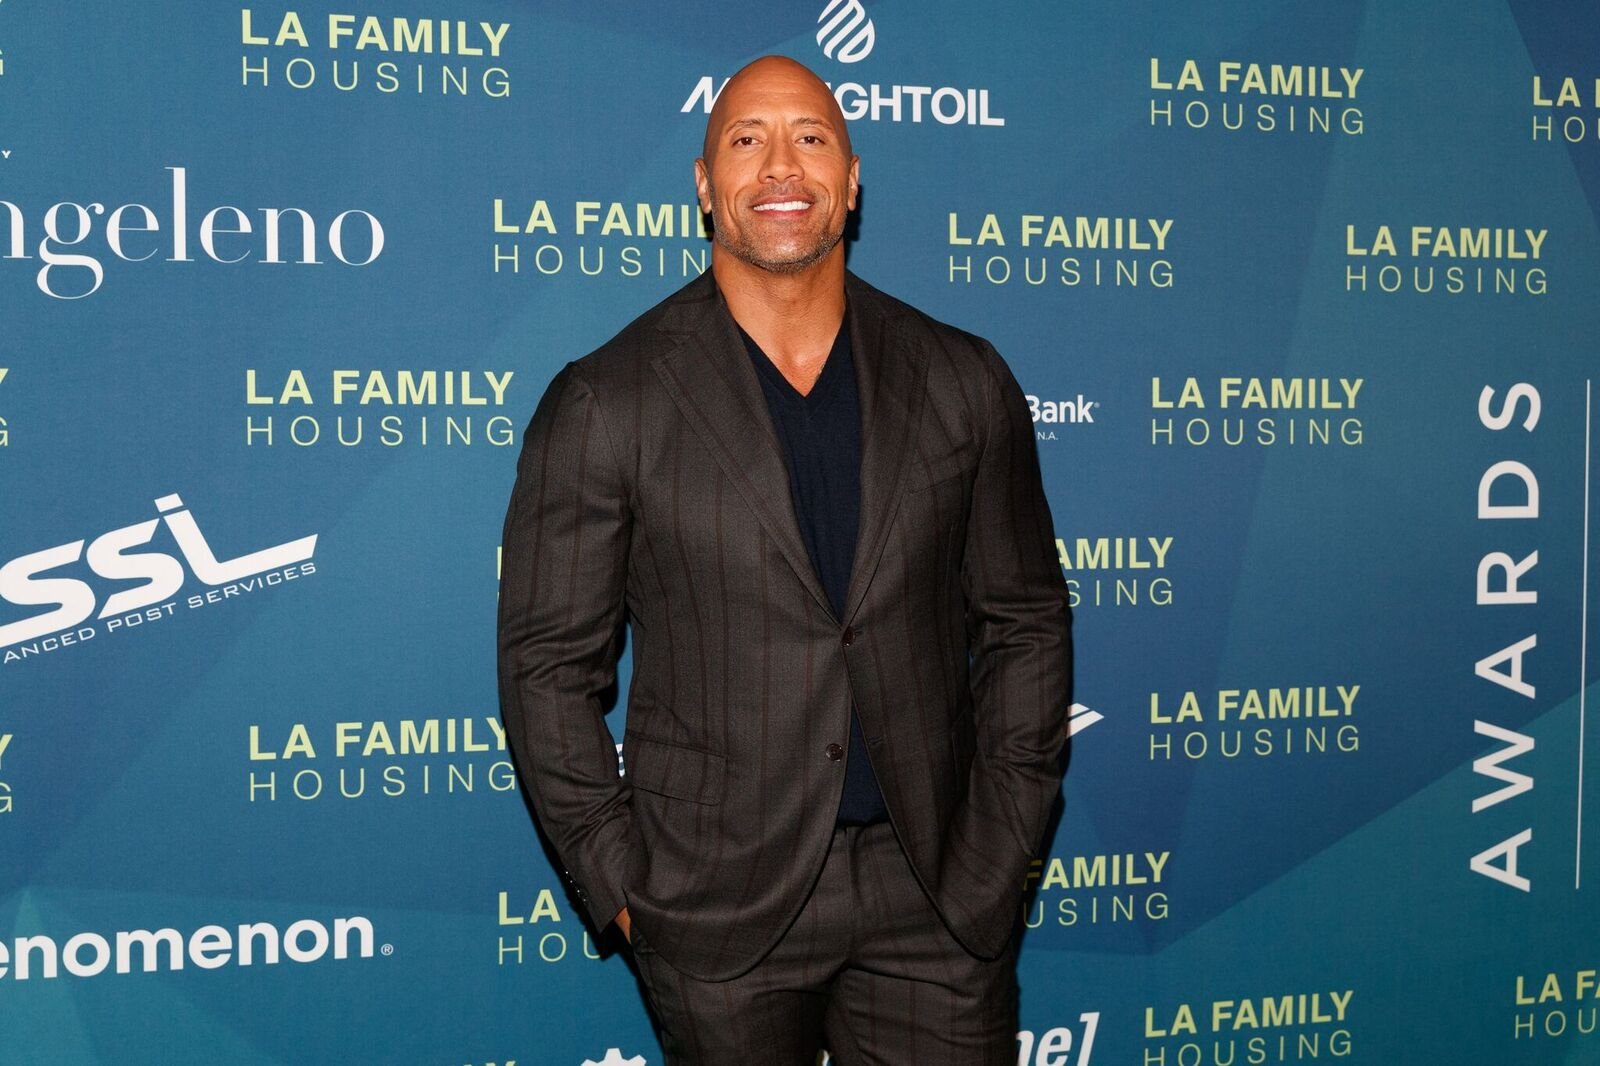 Dwayne Johnson arrives to the LAFH Awards at The Lot in West Hollywood on April 5, 2018 | Photo: Getty Images